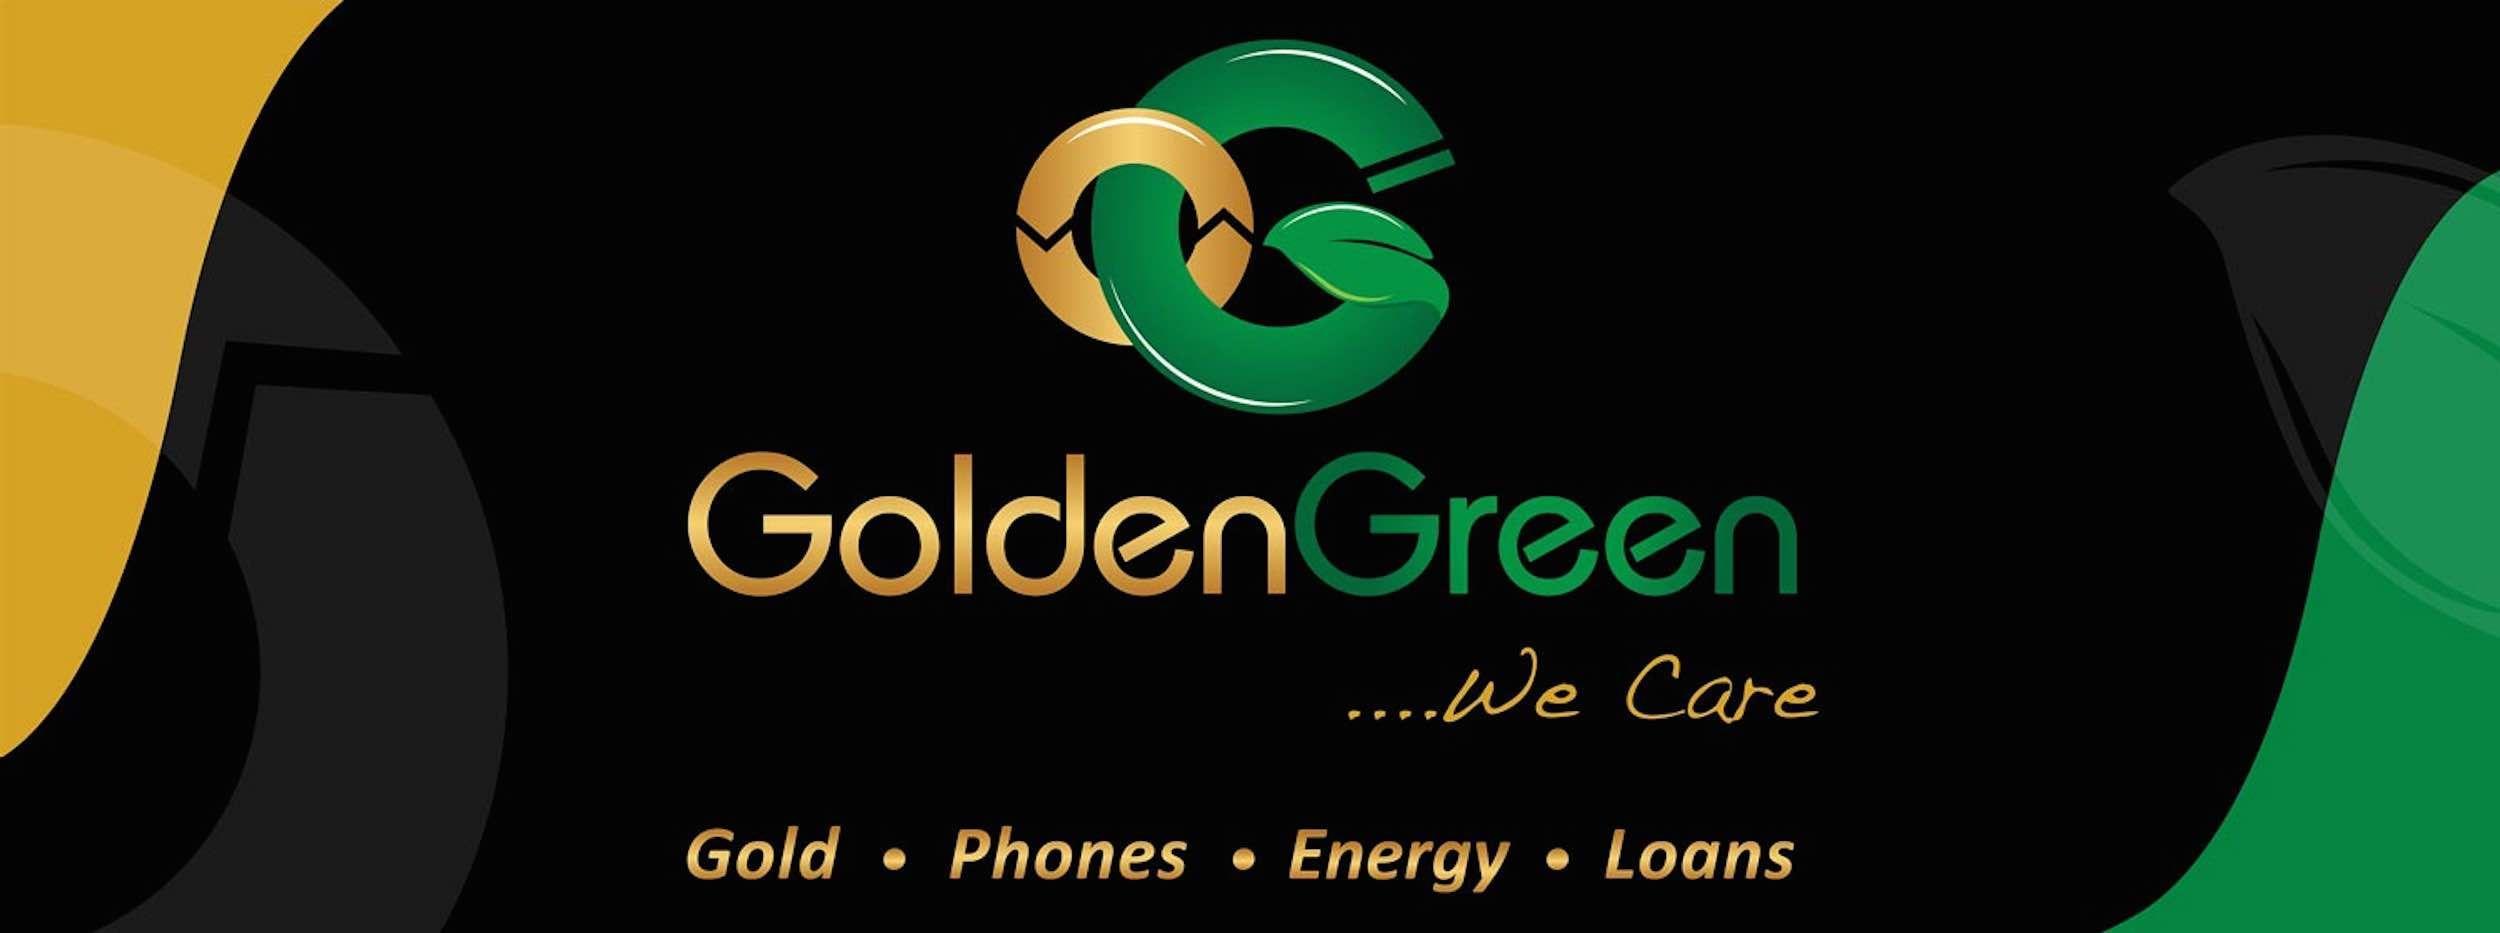 Green and Gold Logo - GoldenGreen - Home